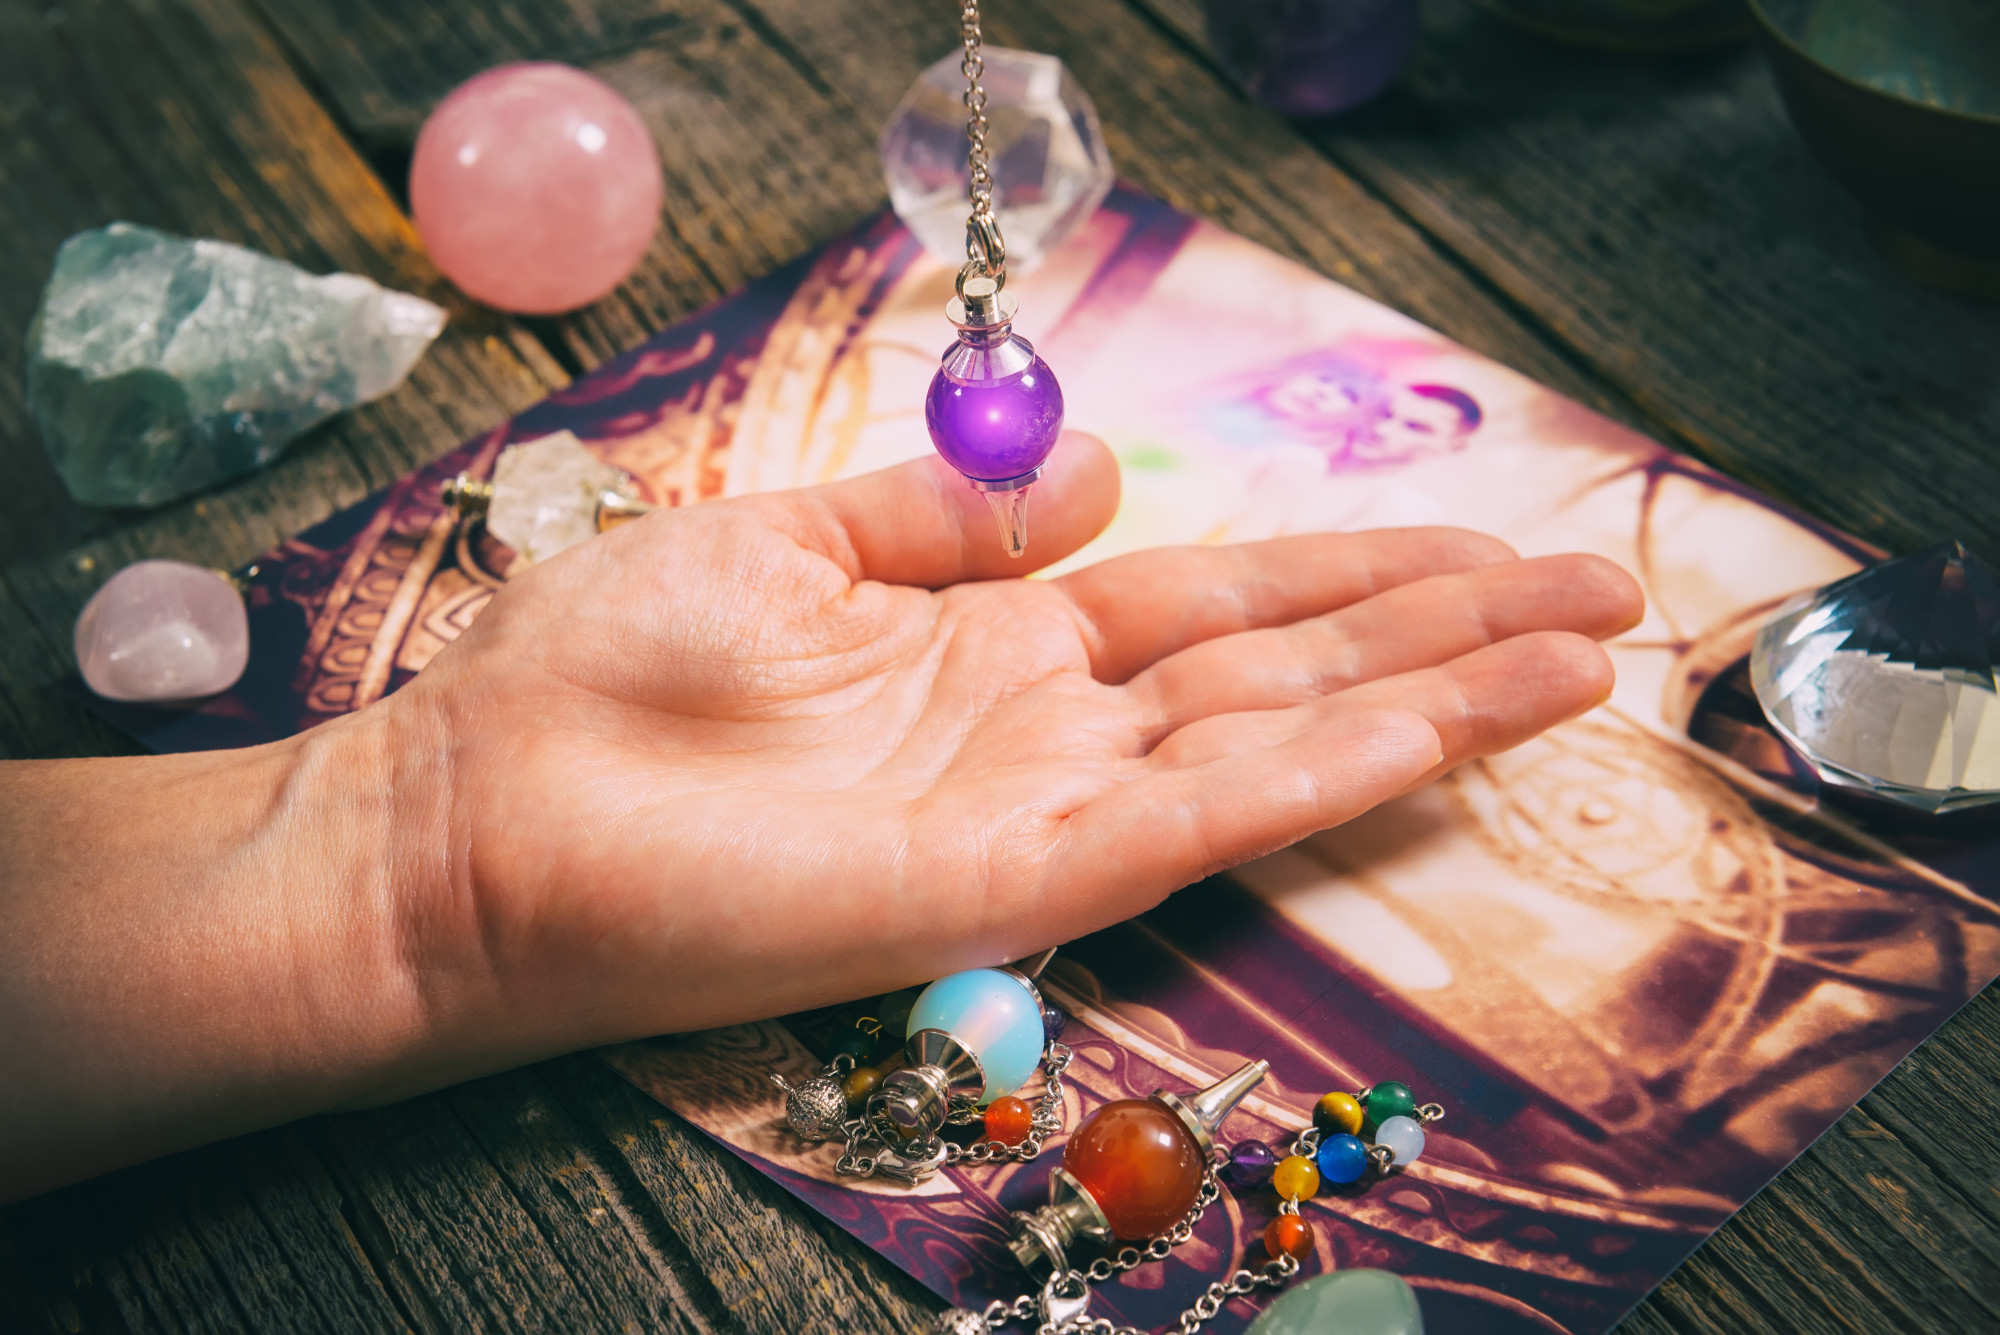 17 Questions to Ask a Psychic About Your Love Life